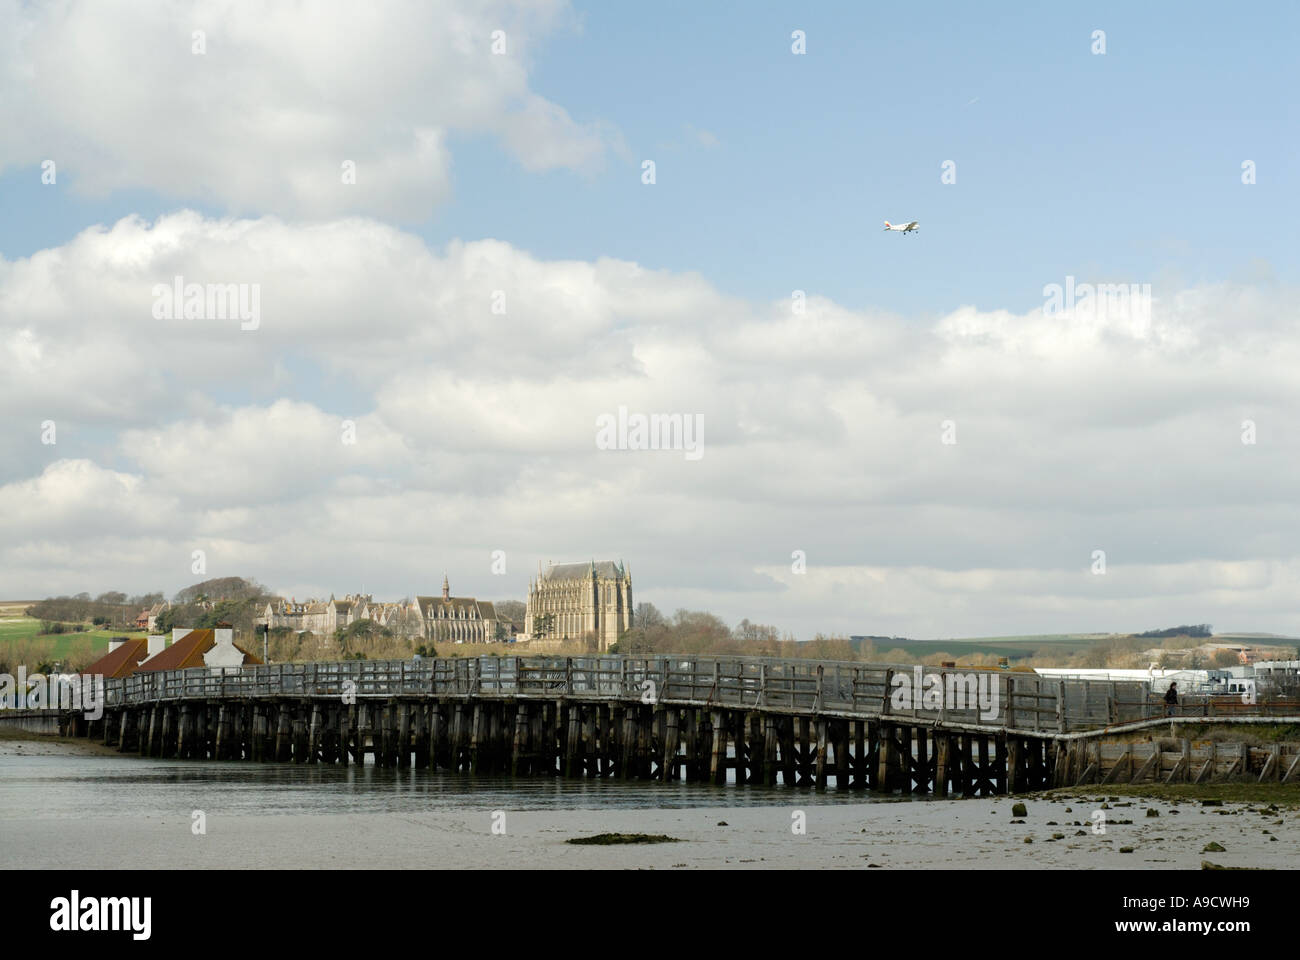 18th century Old tollbridge Shoreham with Lancing College in the background. Bridge due for renovation Stock Photo